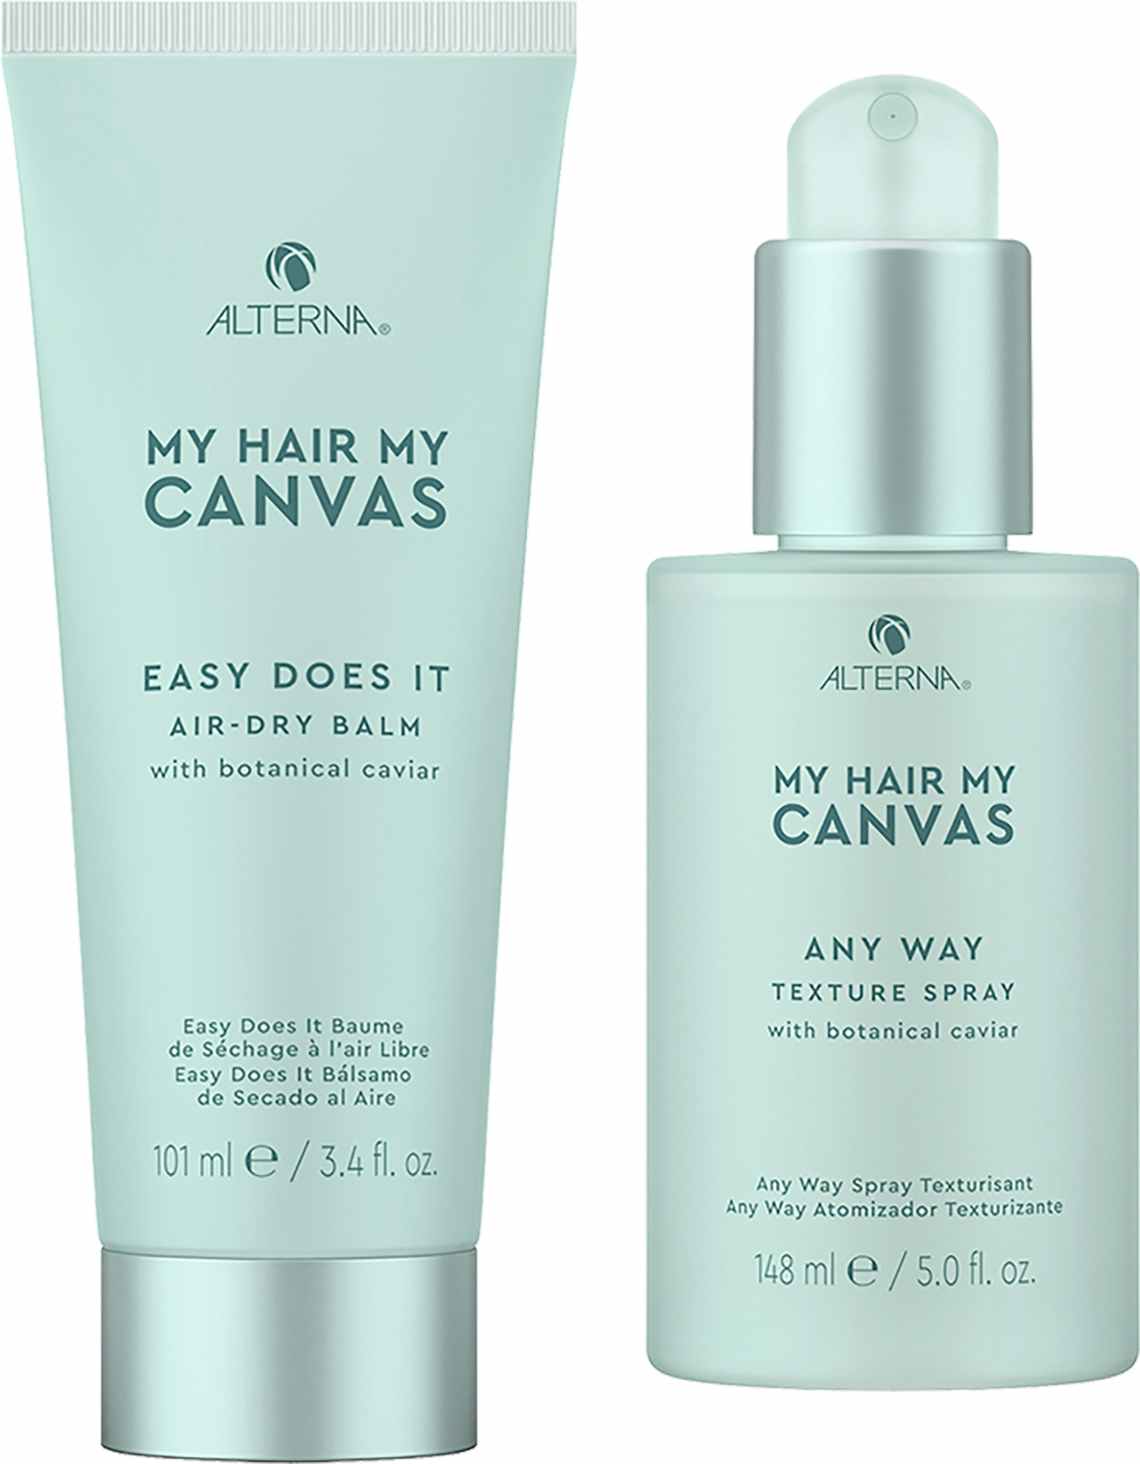 Two Alterna hair products